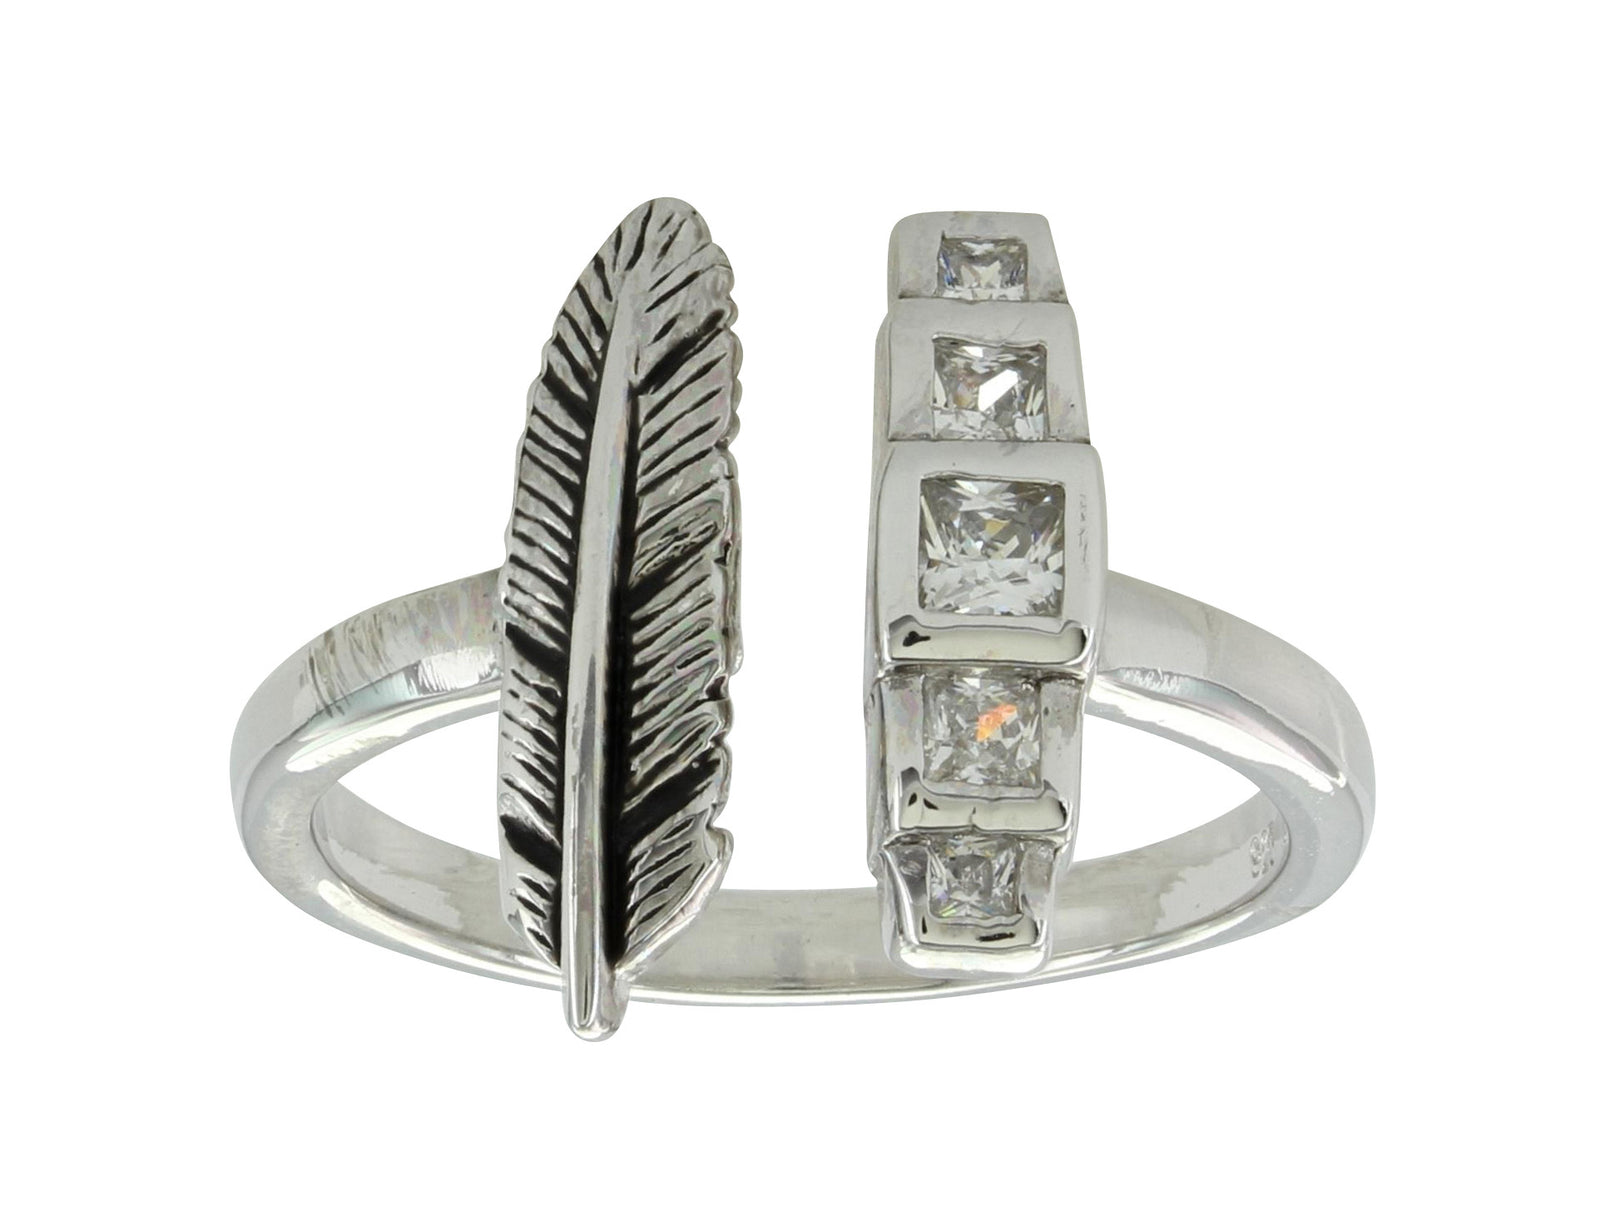 Wild In Equal Measure Ring